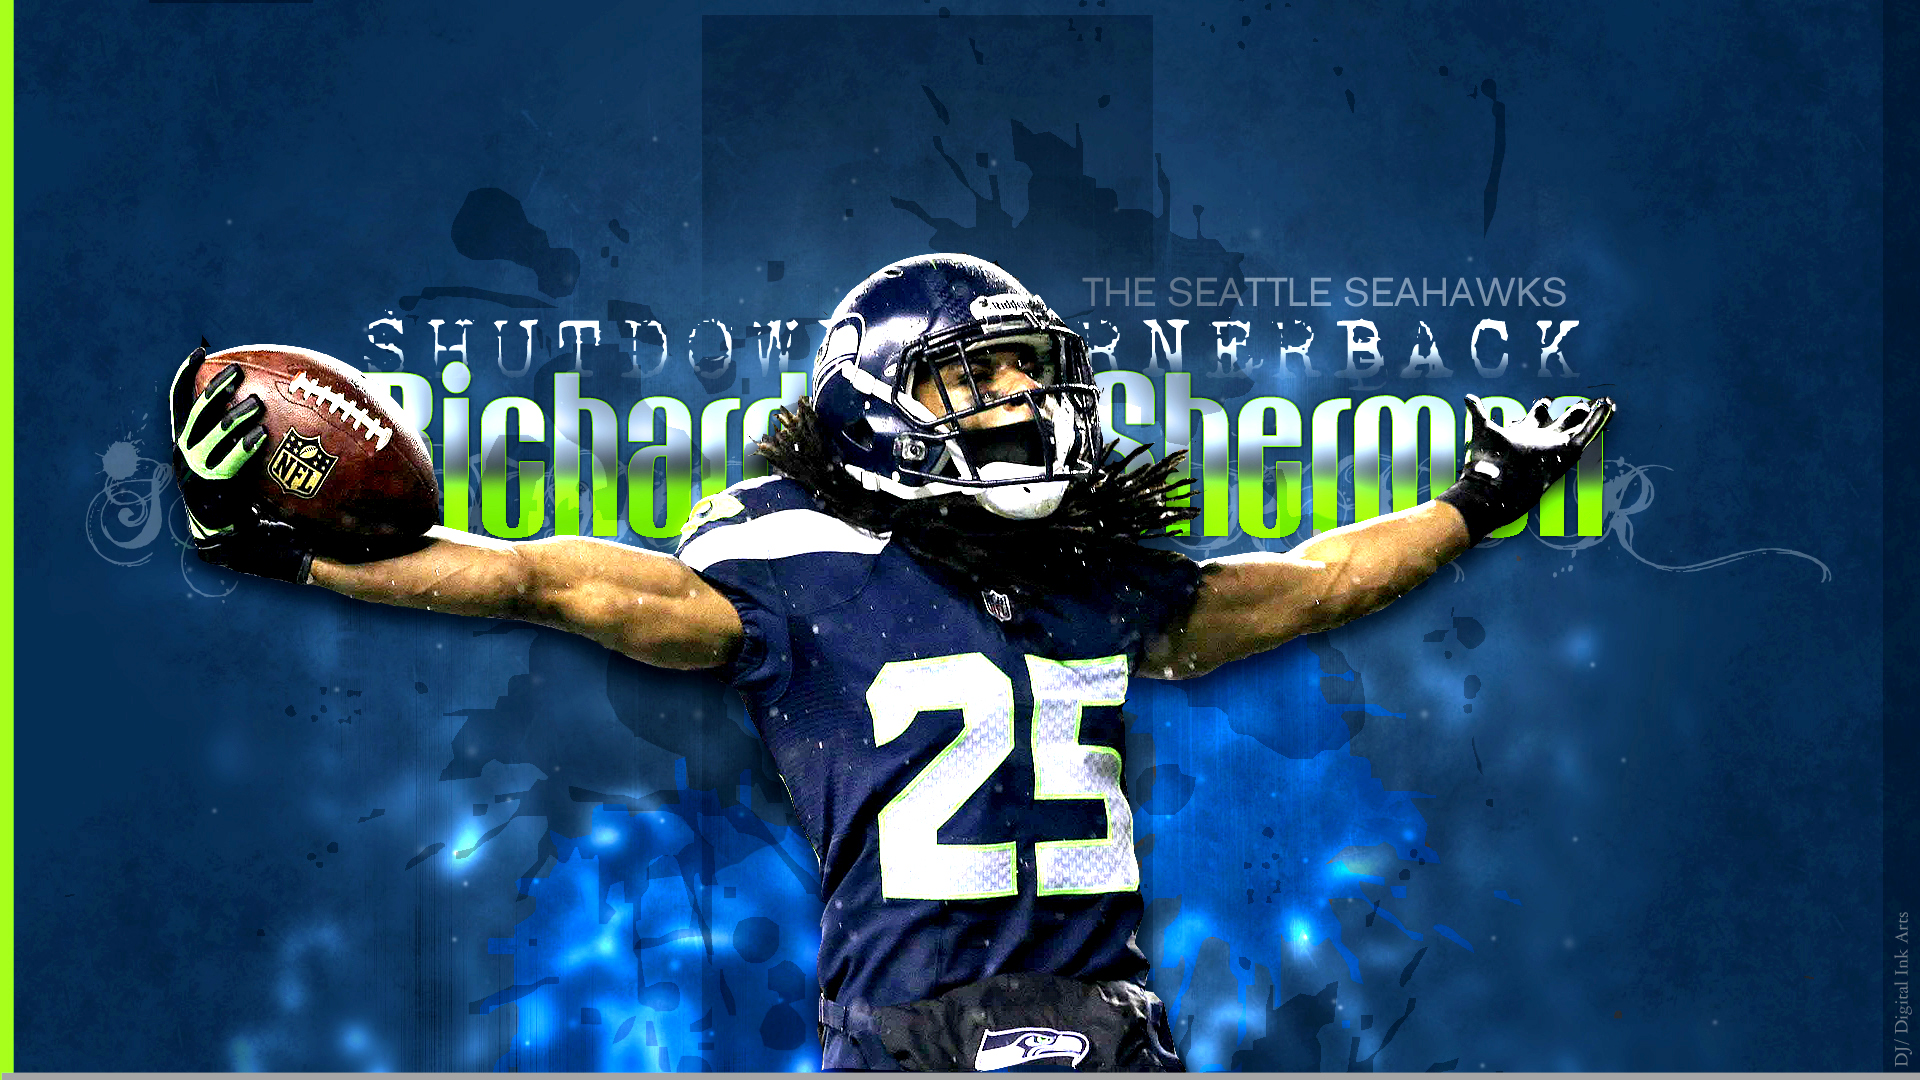 Seahawks pics Image Seahawks Pictures Wallpaper